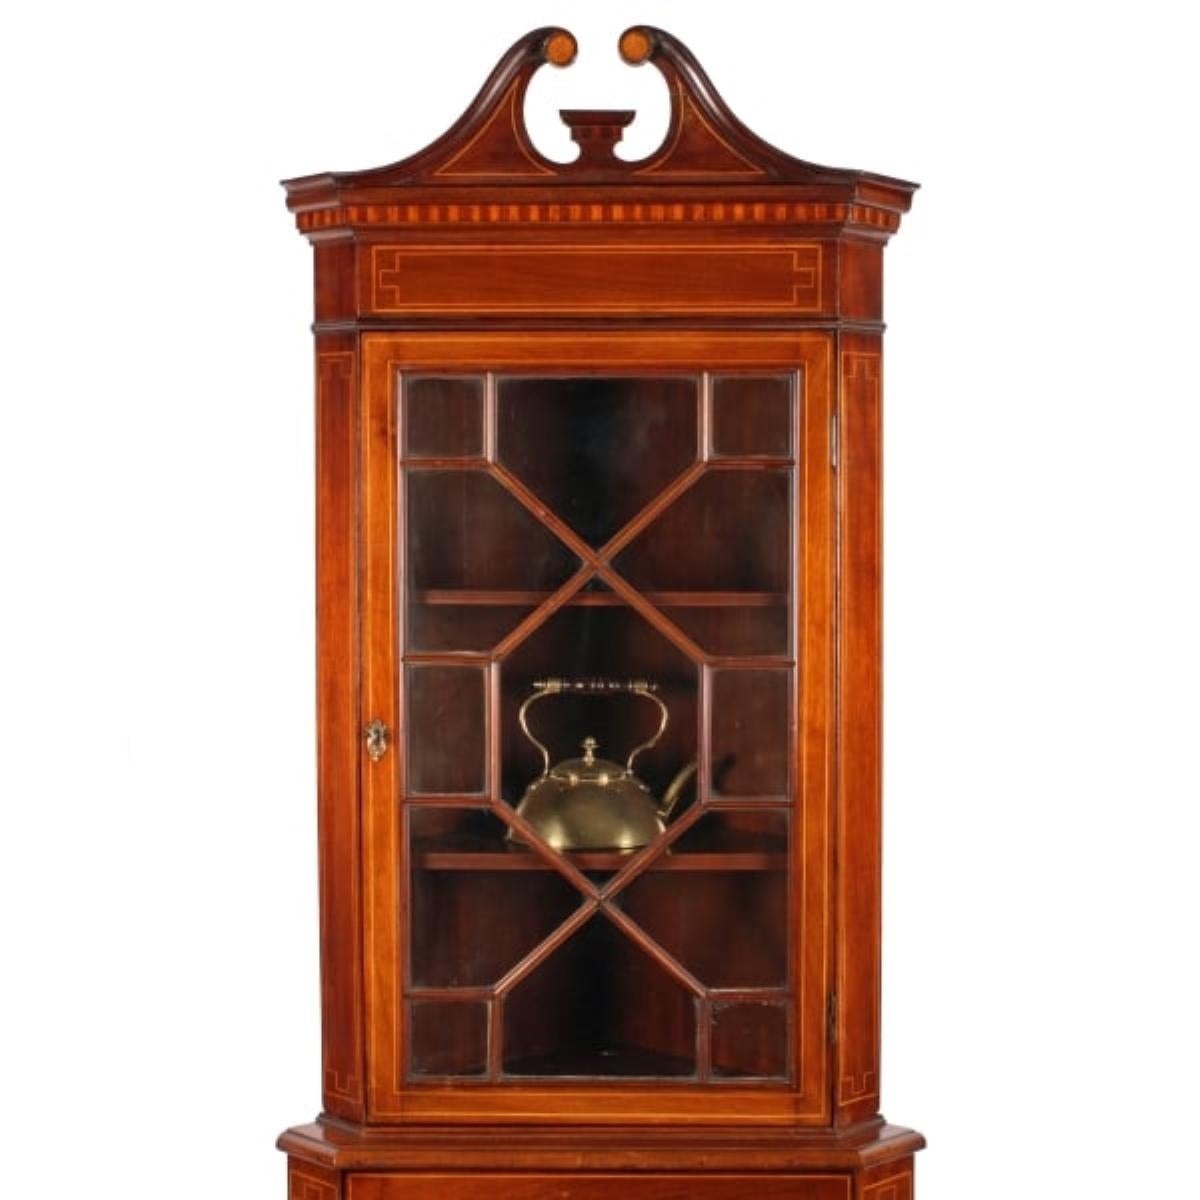 Edwardian inlaid double corner cabinet

An early 20th century Edwardian Georgian style inlaid mahogany double corner cabinet.

The cabinet has a single door top with astragal glazing and the door frame has box wood line inlay.

The cupboard